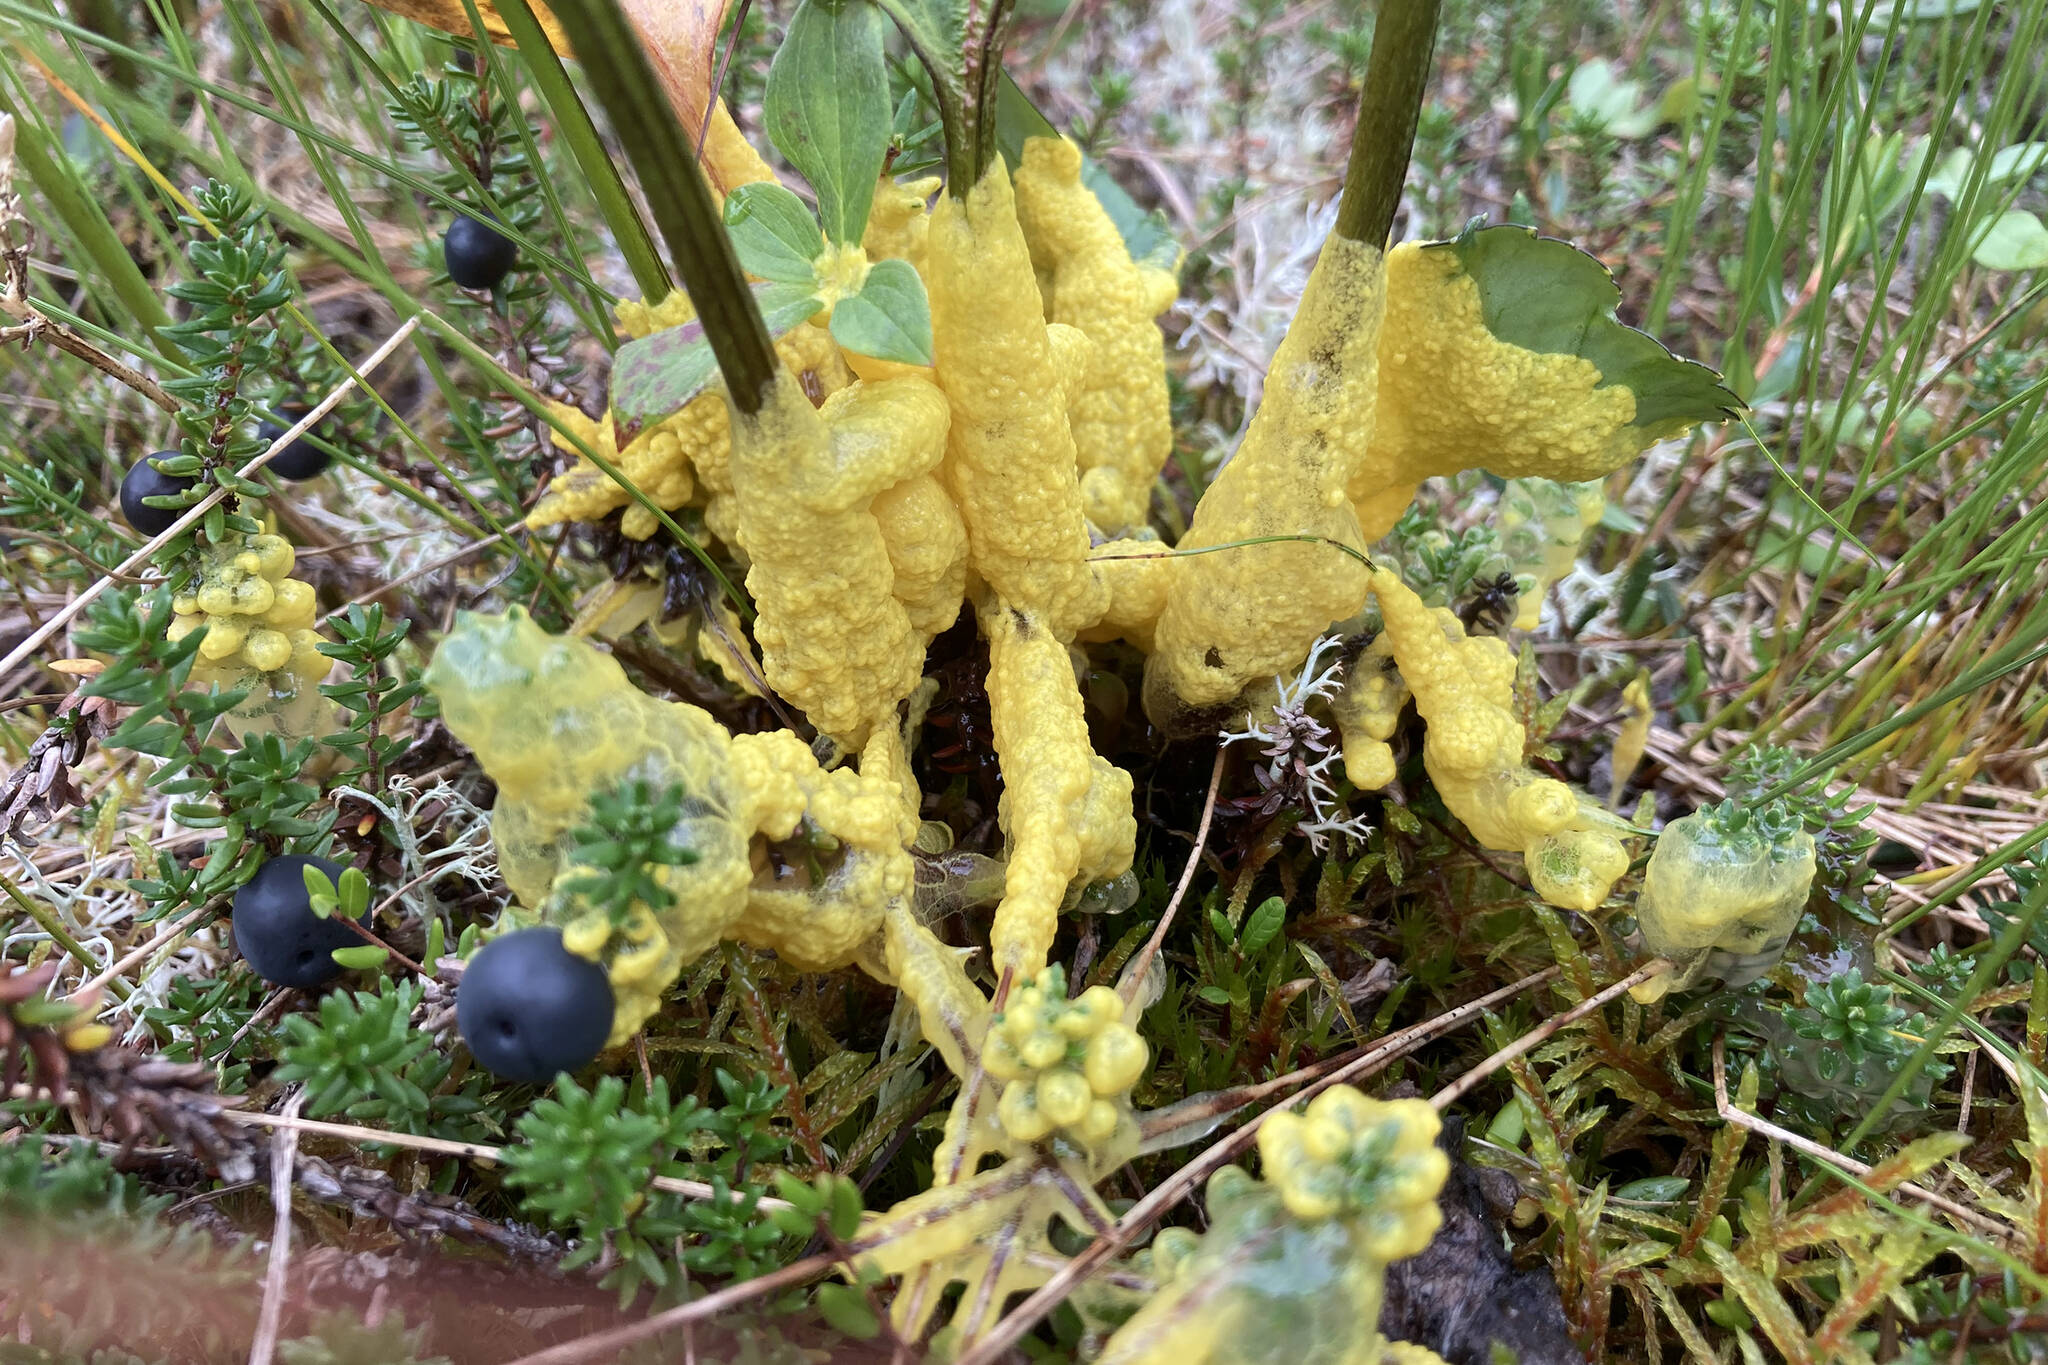 A yellow slime mold is an aggregation of separate cells that came together to reproduce; this one engulfs several plant stems. (Courtesy Photo / Mary F. Willson)